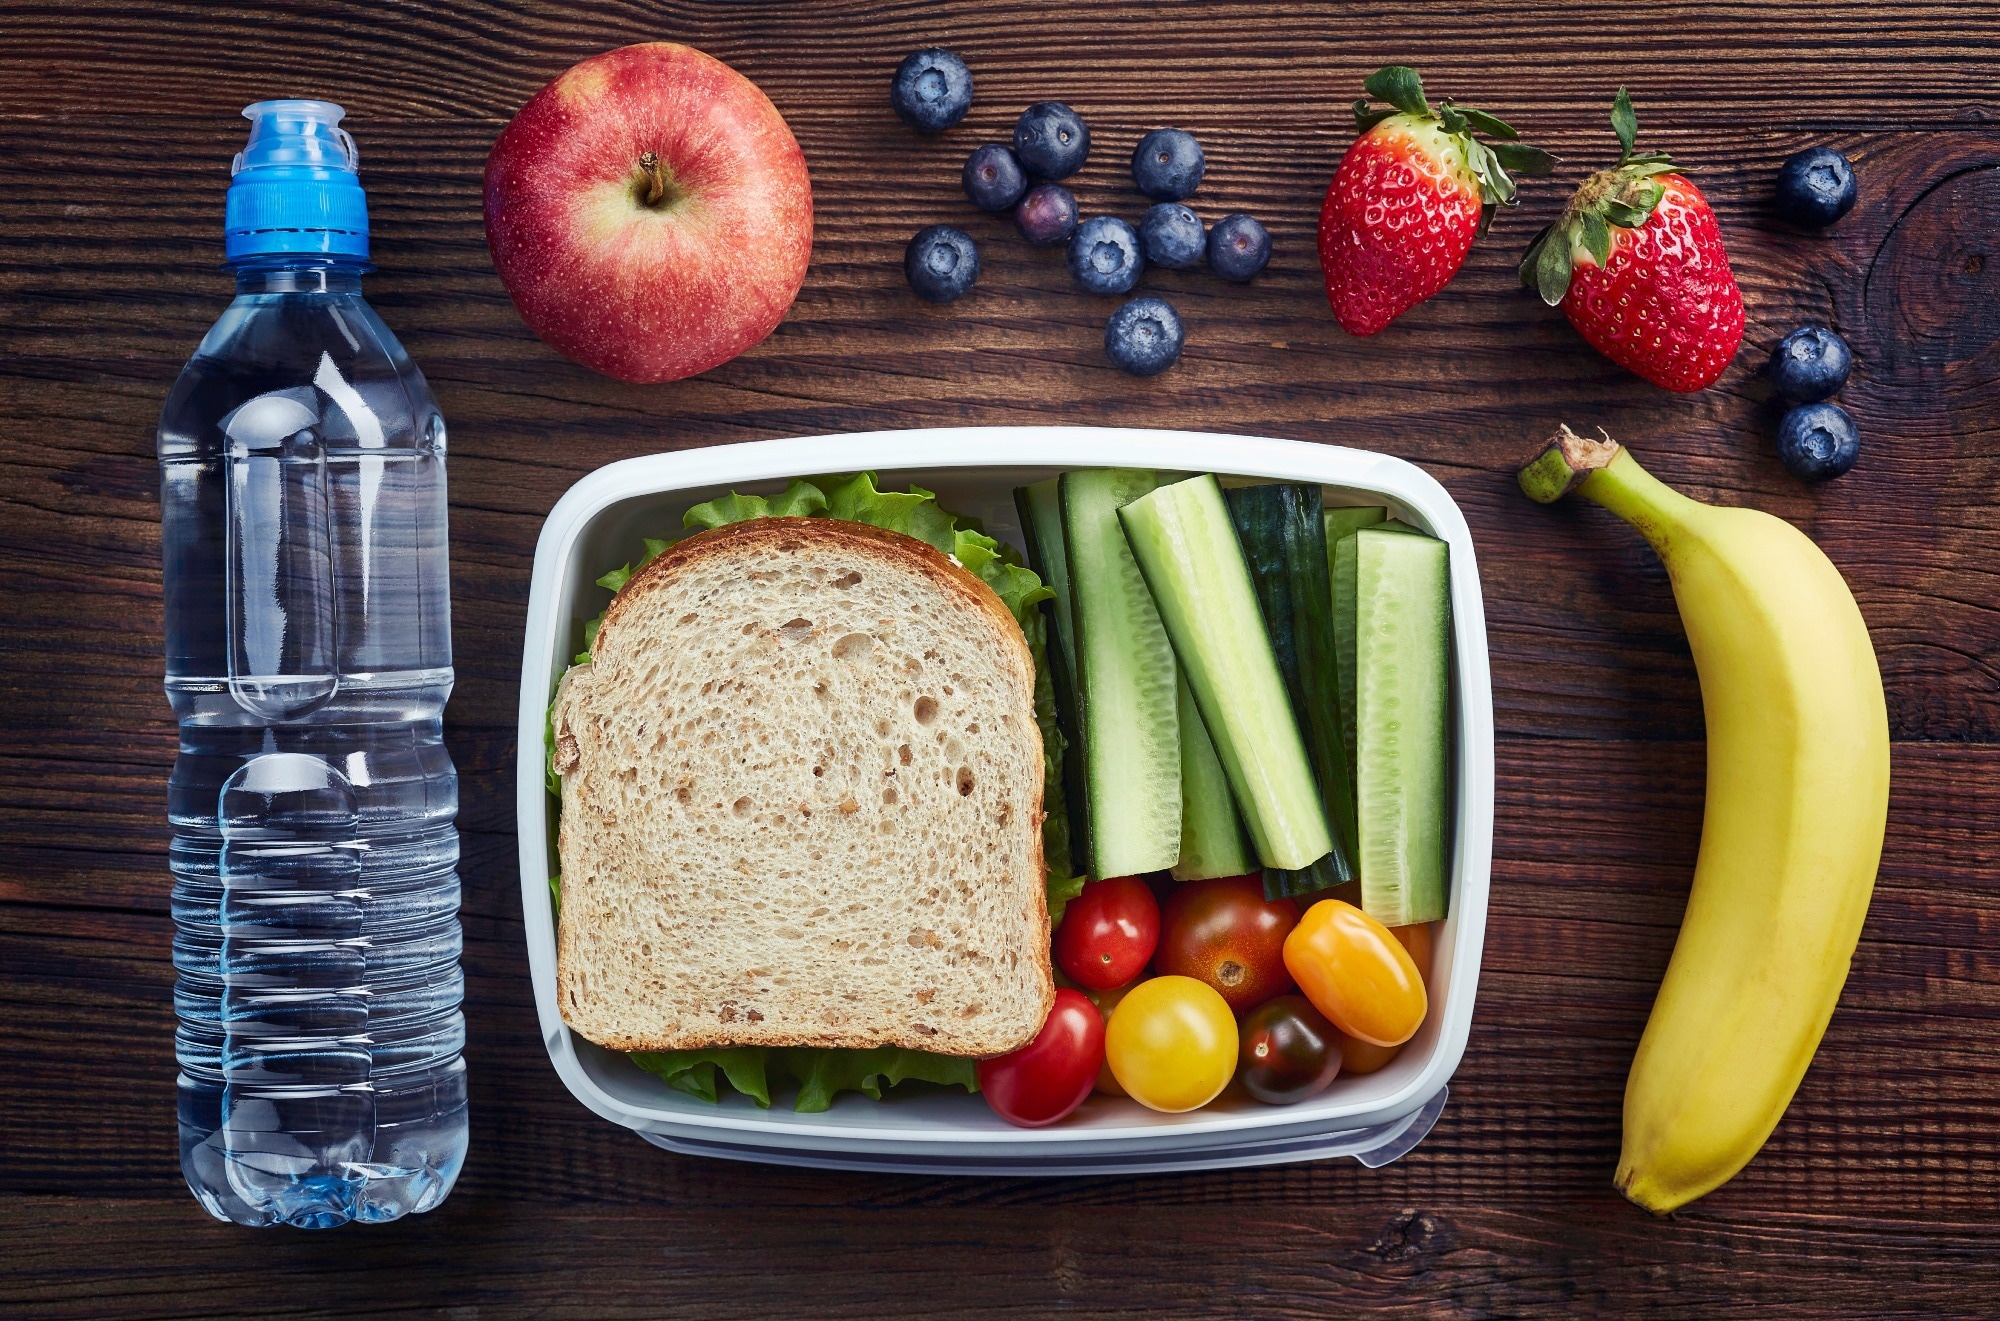 Study: The Nutritional Quality of Food Provision at UK Government-Funded Holiday Clubs: A Cross-Sectional Analysis of Energy and Nutrient Content. Image Credit: baibaz/Shutterstock.com